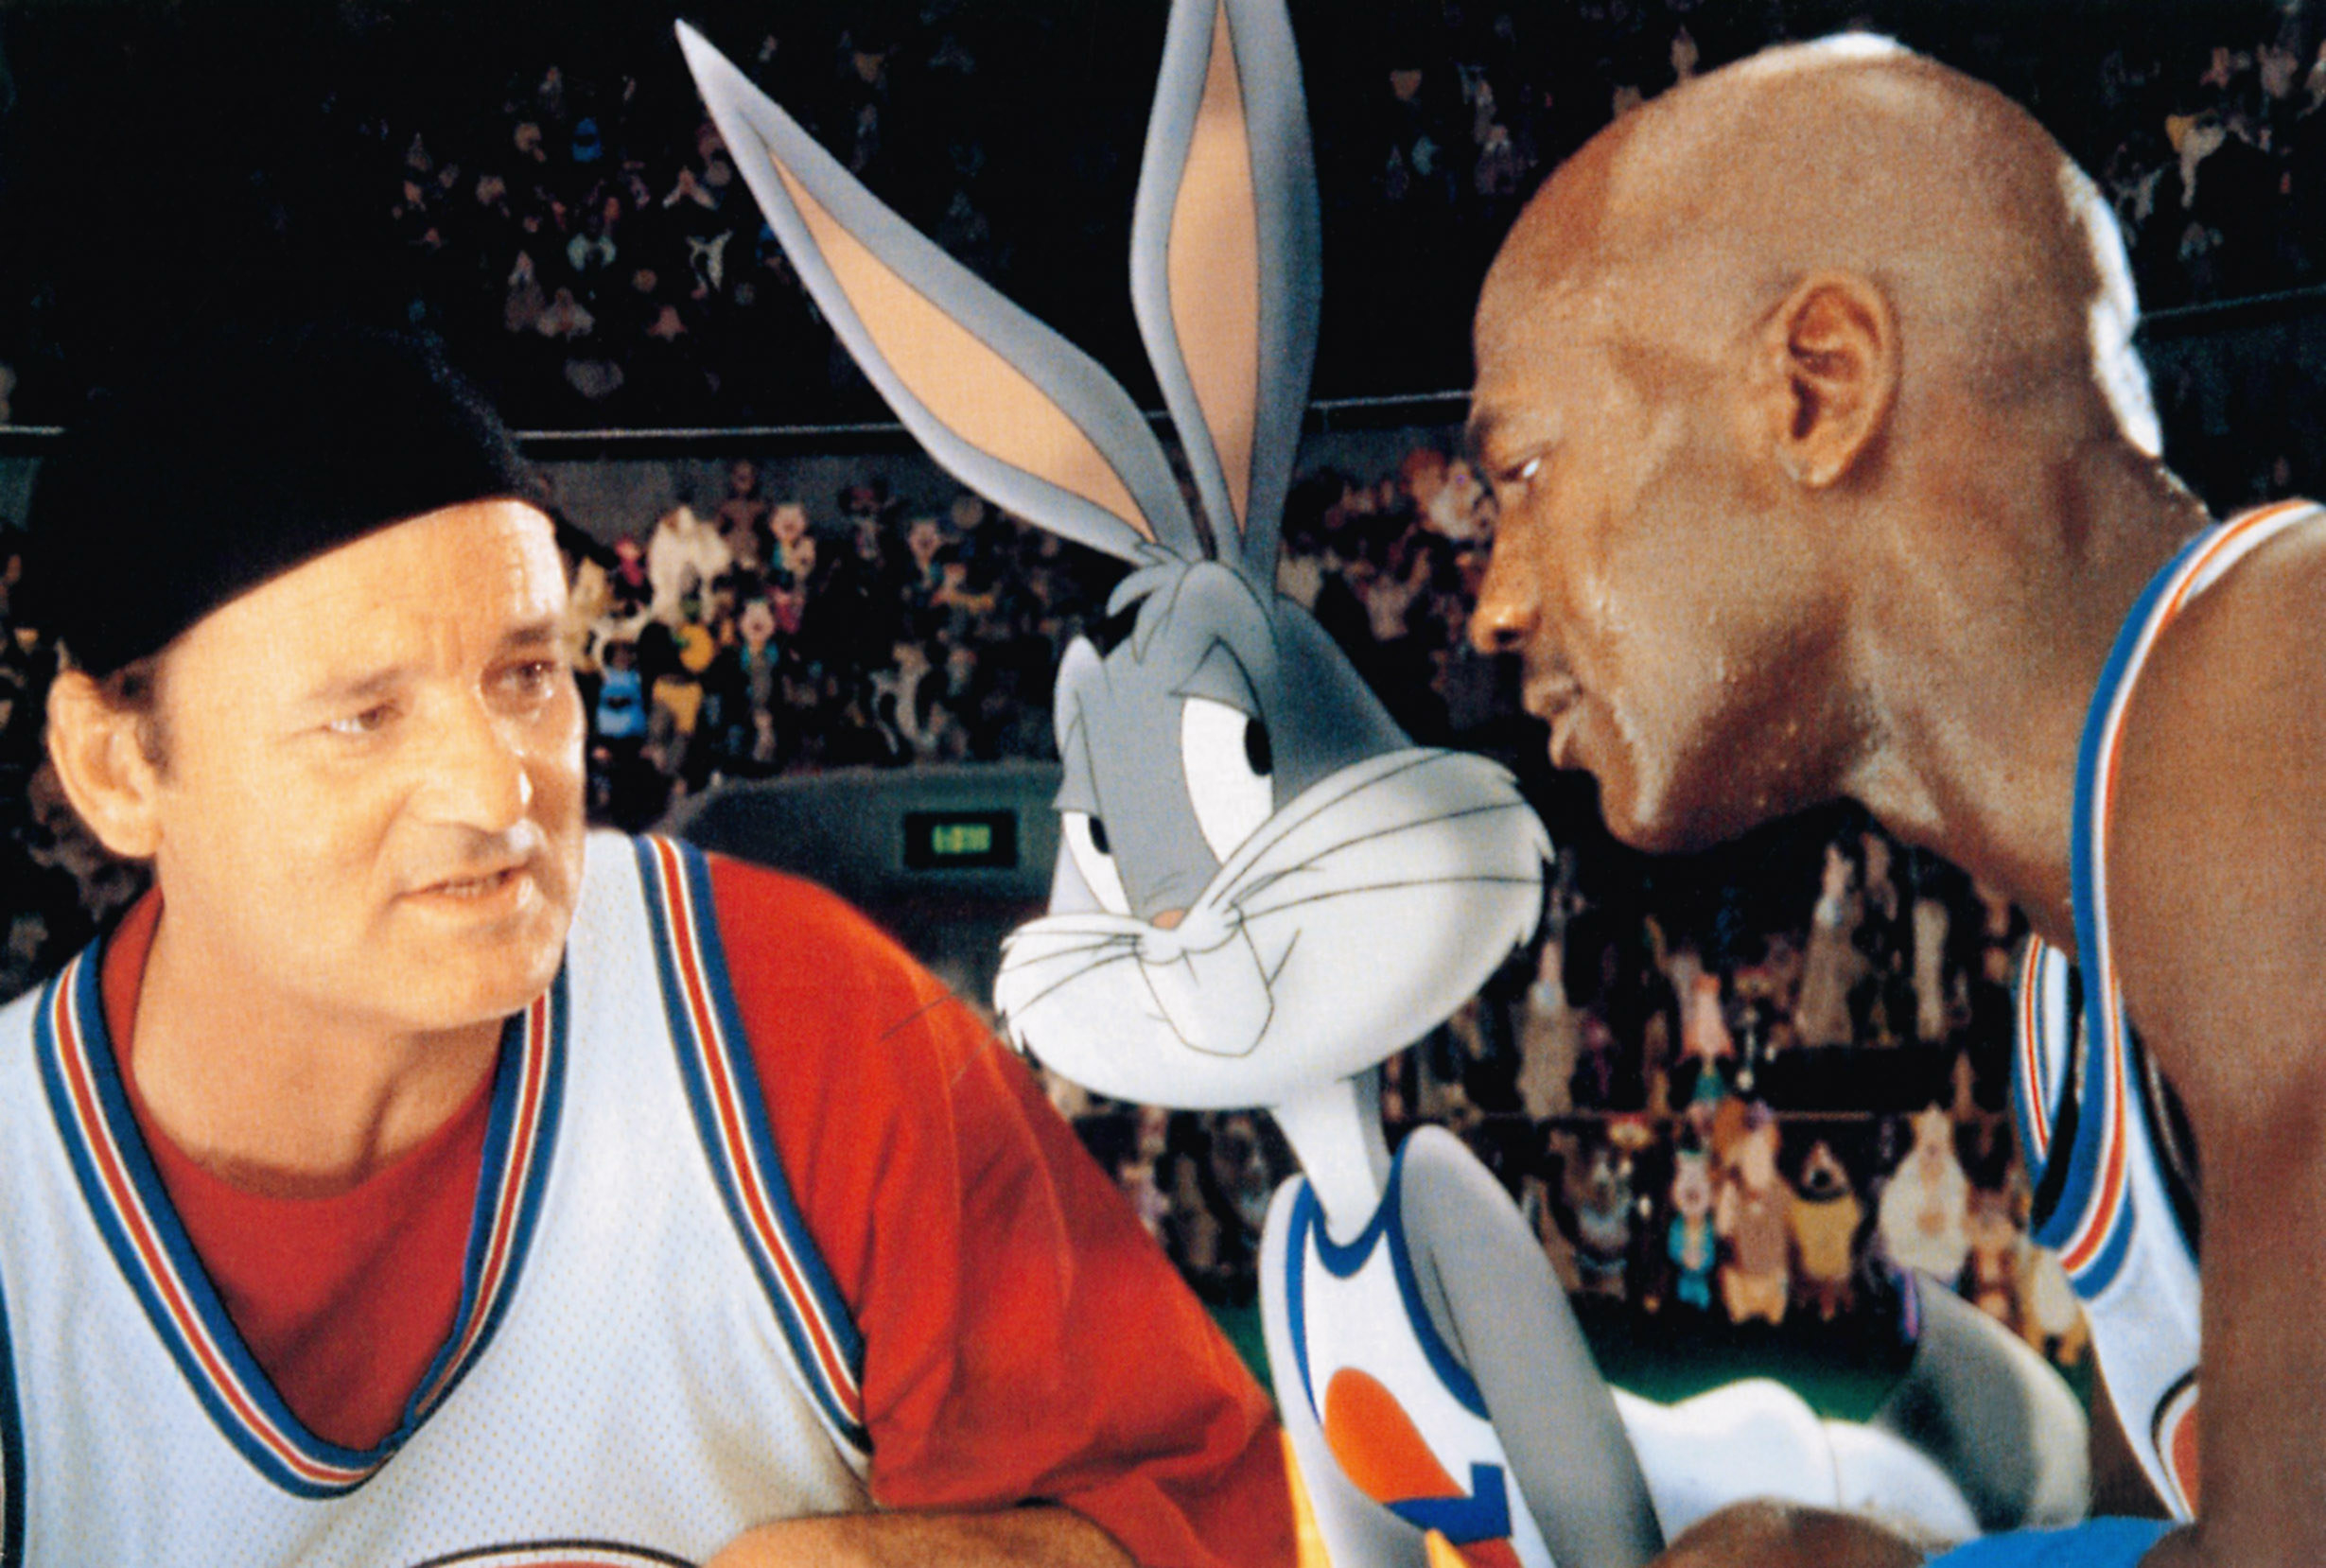 Bill Murray and Michael Jordan in a scene with Bugs Bunny